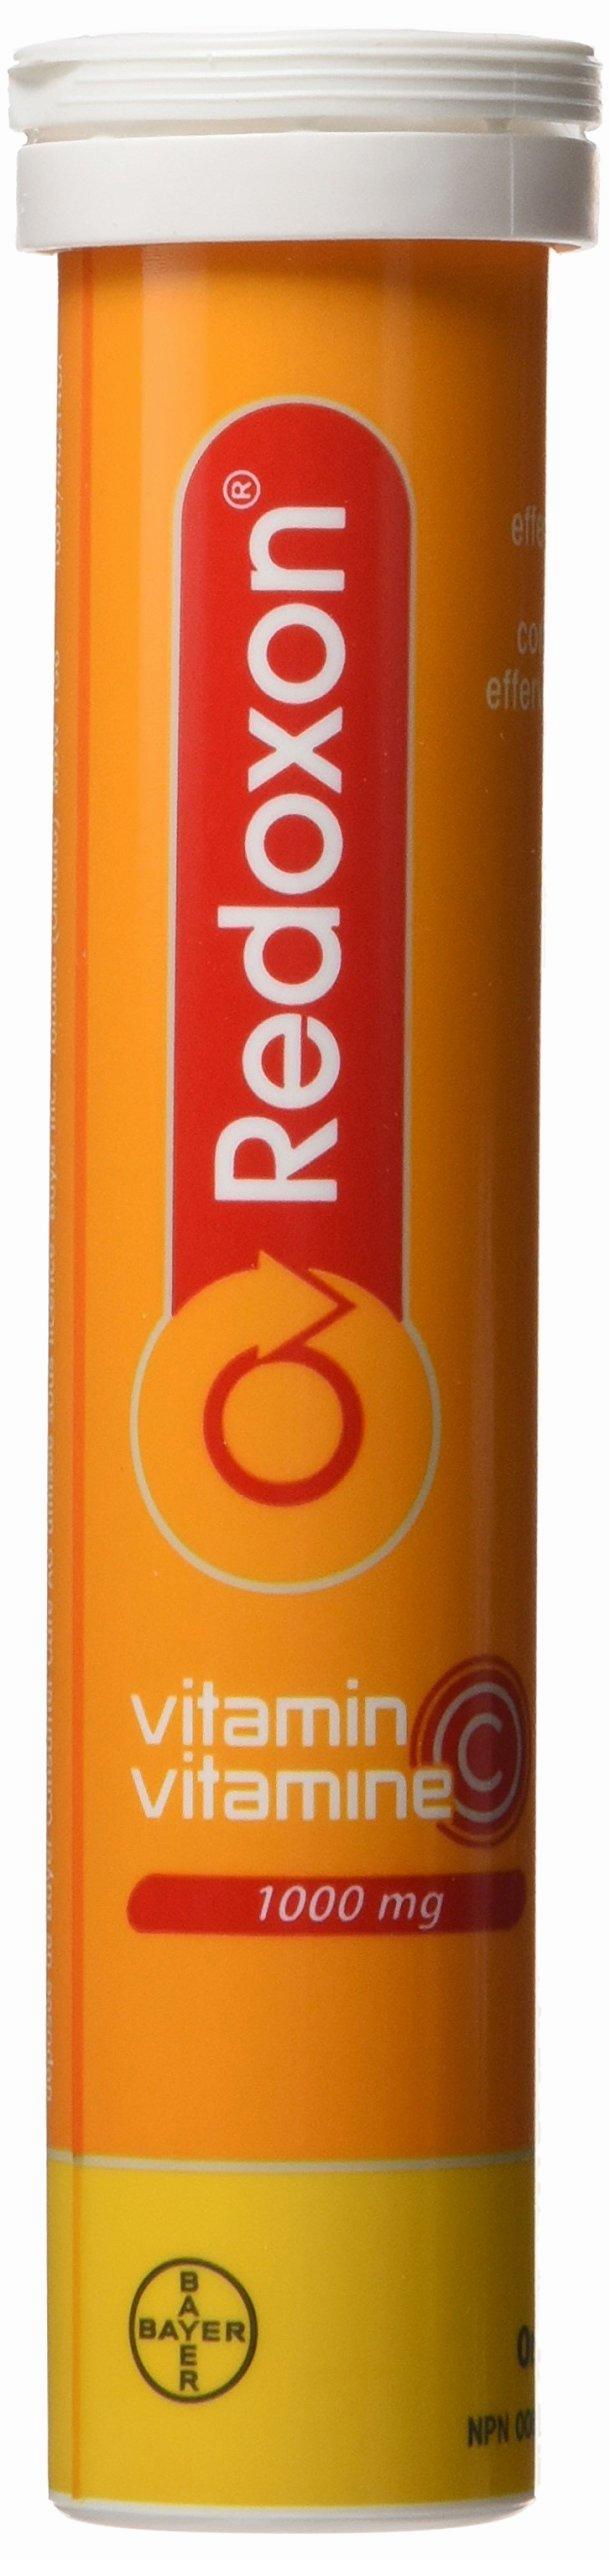 A tube of effervescent vitamin C tablets.